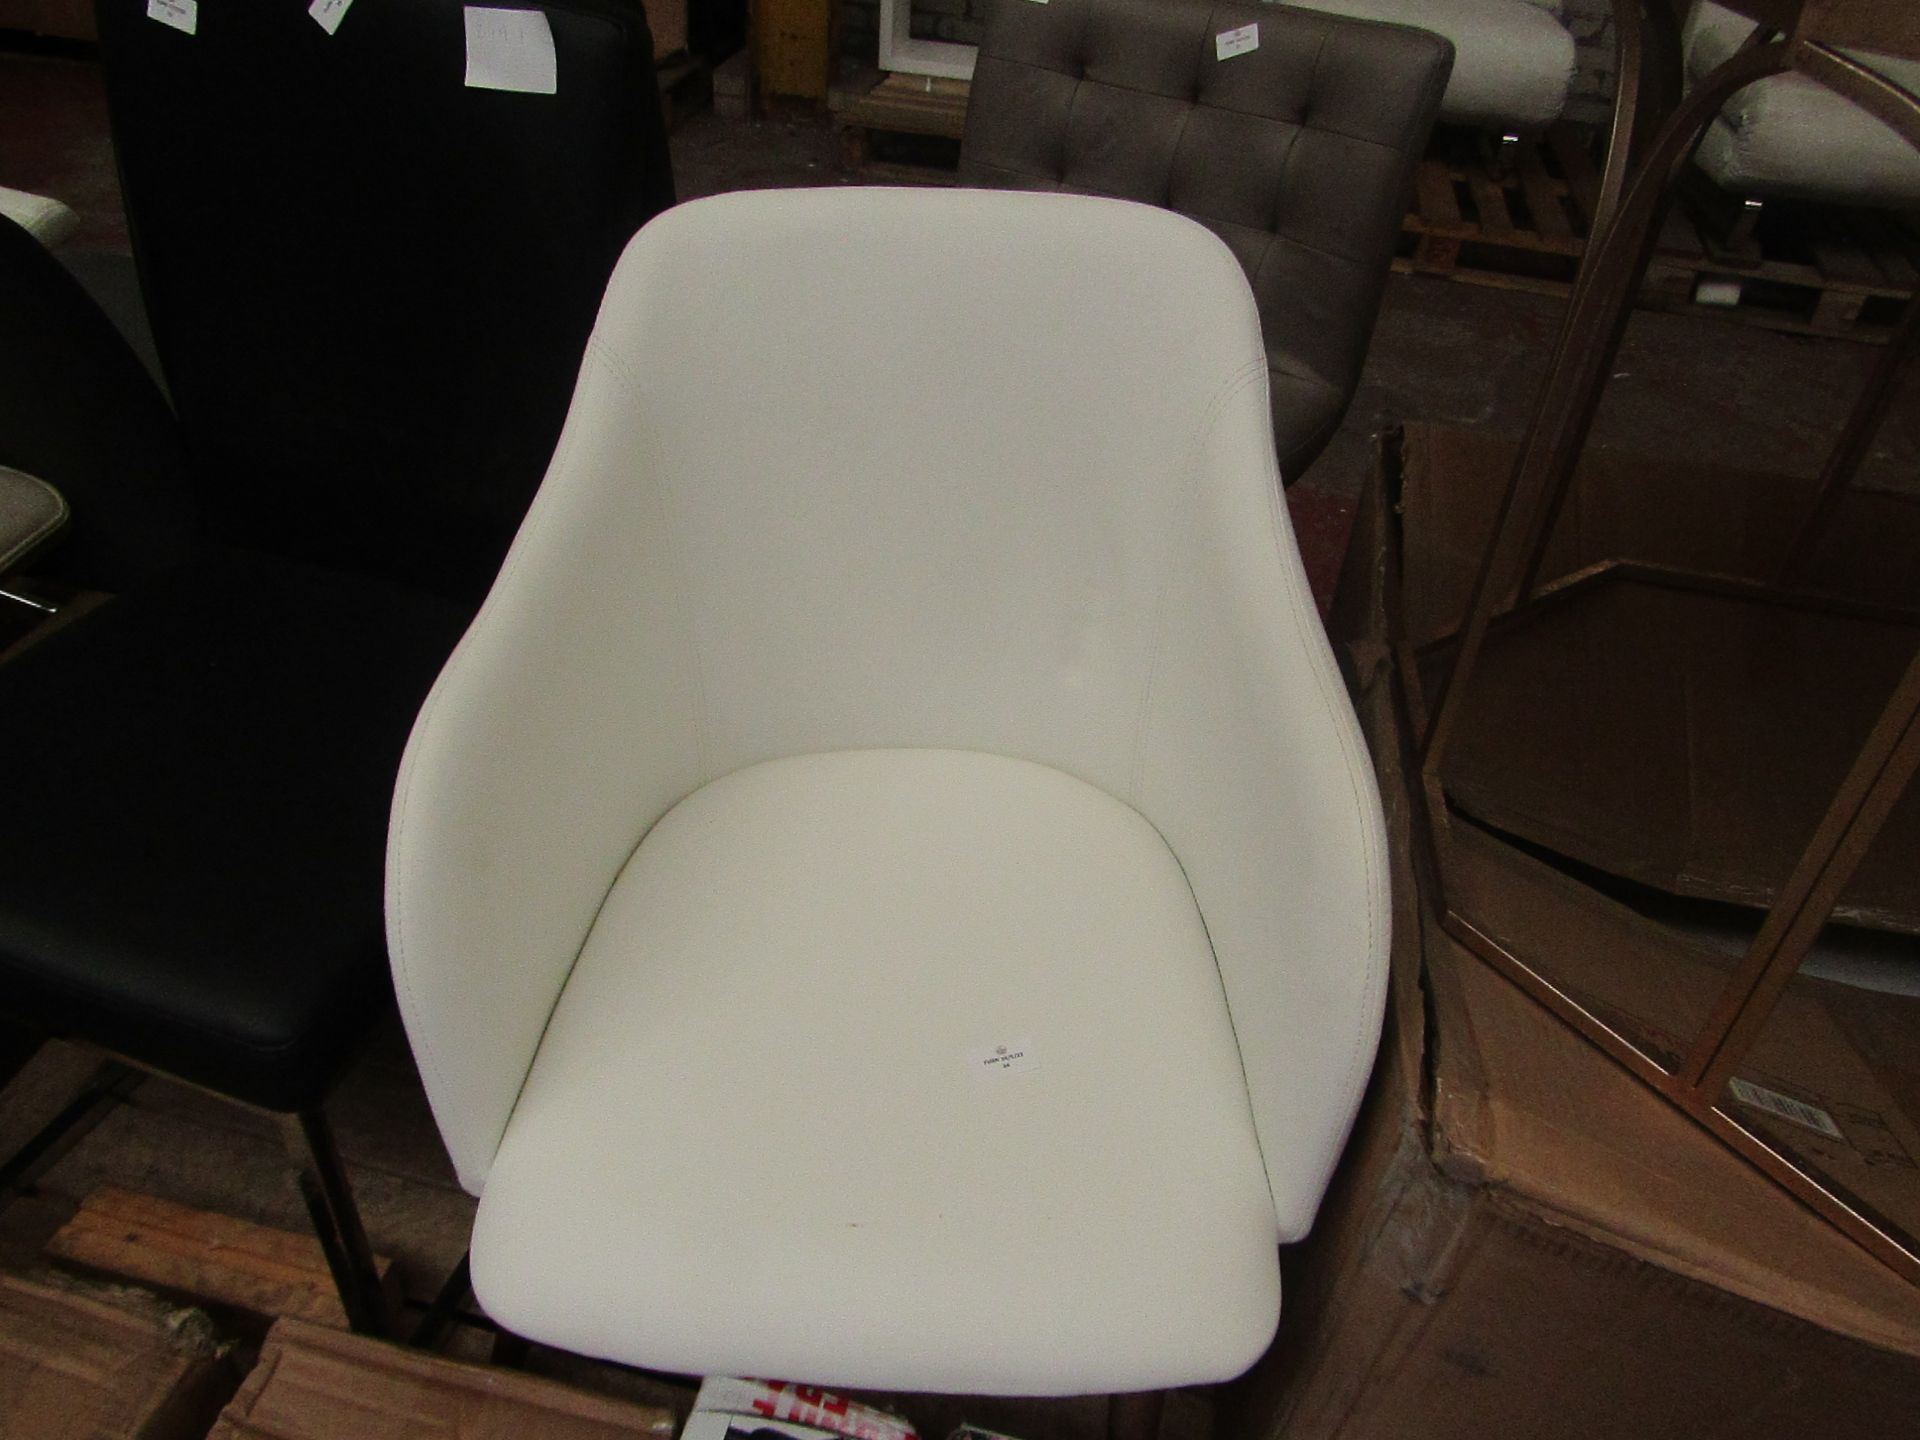 1 x Dwell Dip Dining Chair White RRP £164.00 SKU DWE-APM-145875 TOTAL RRP £164 This lot is a